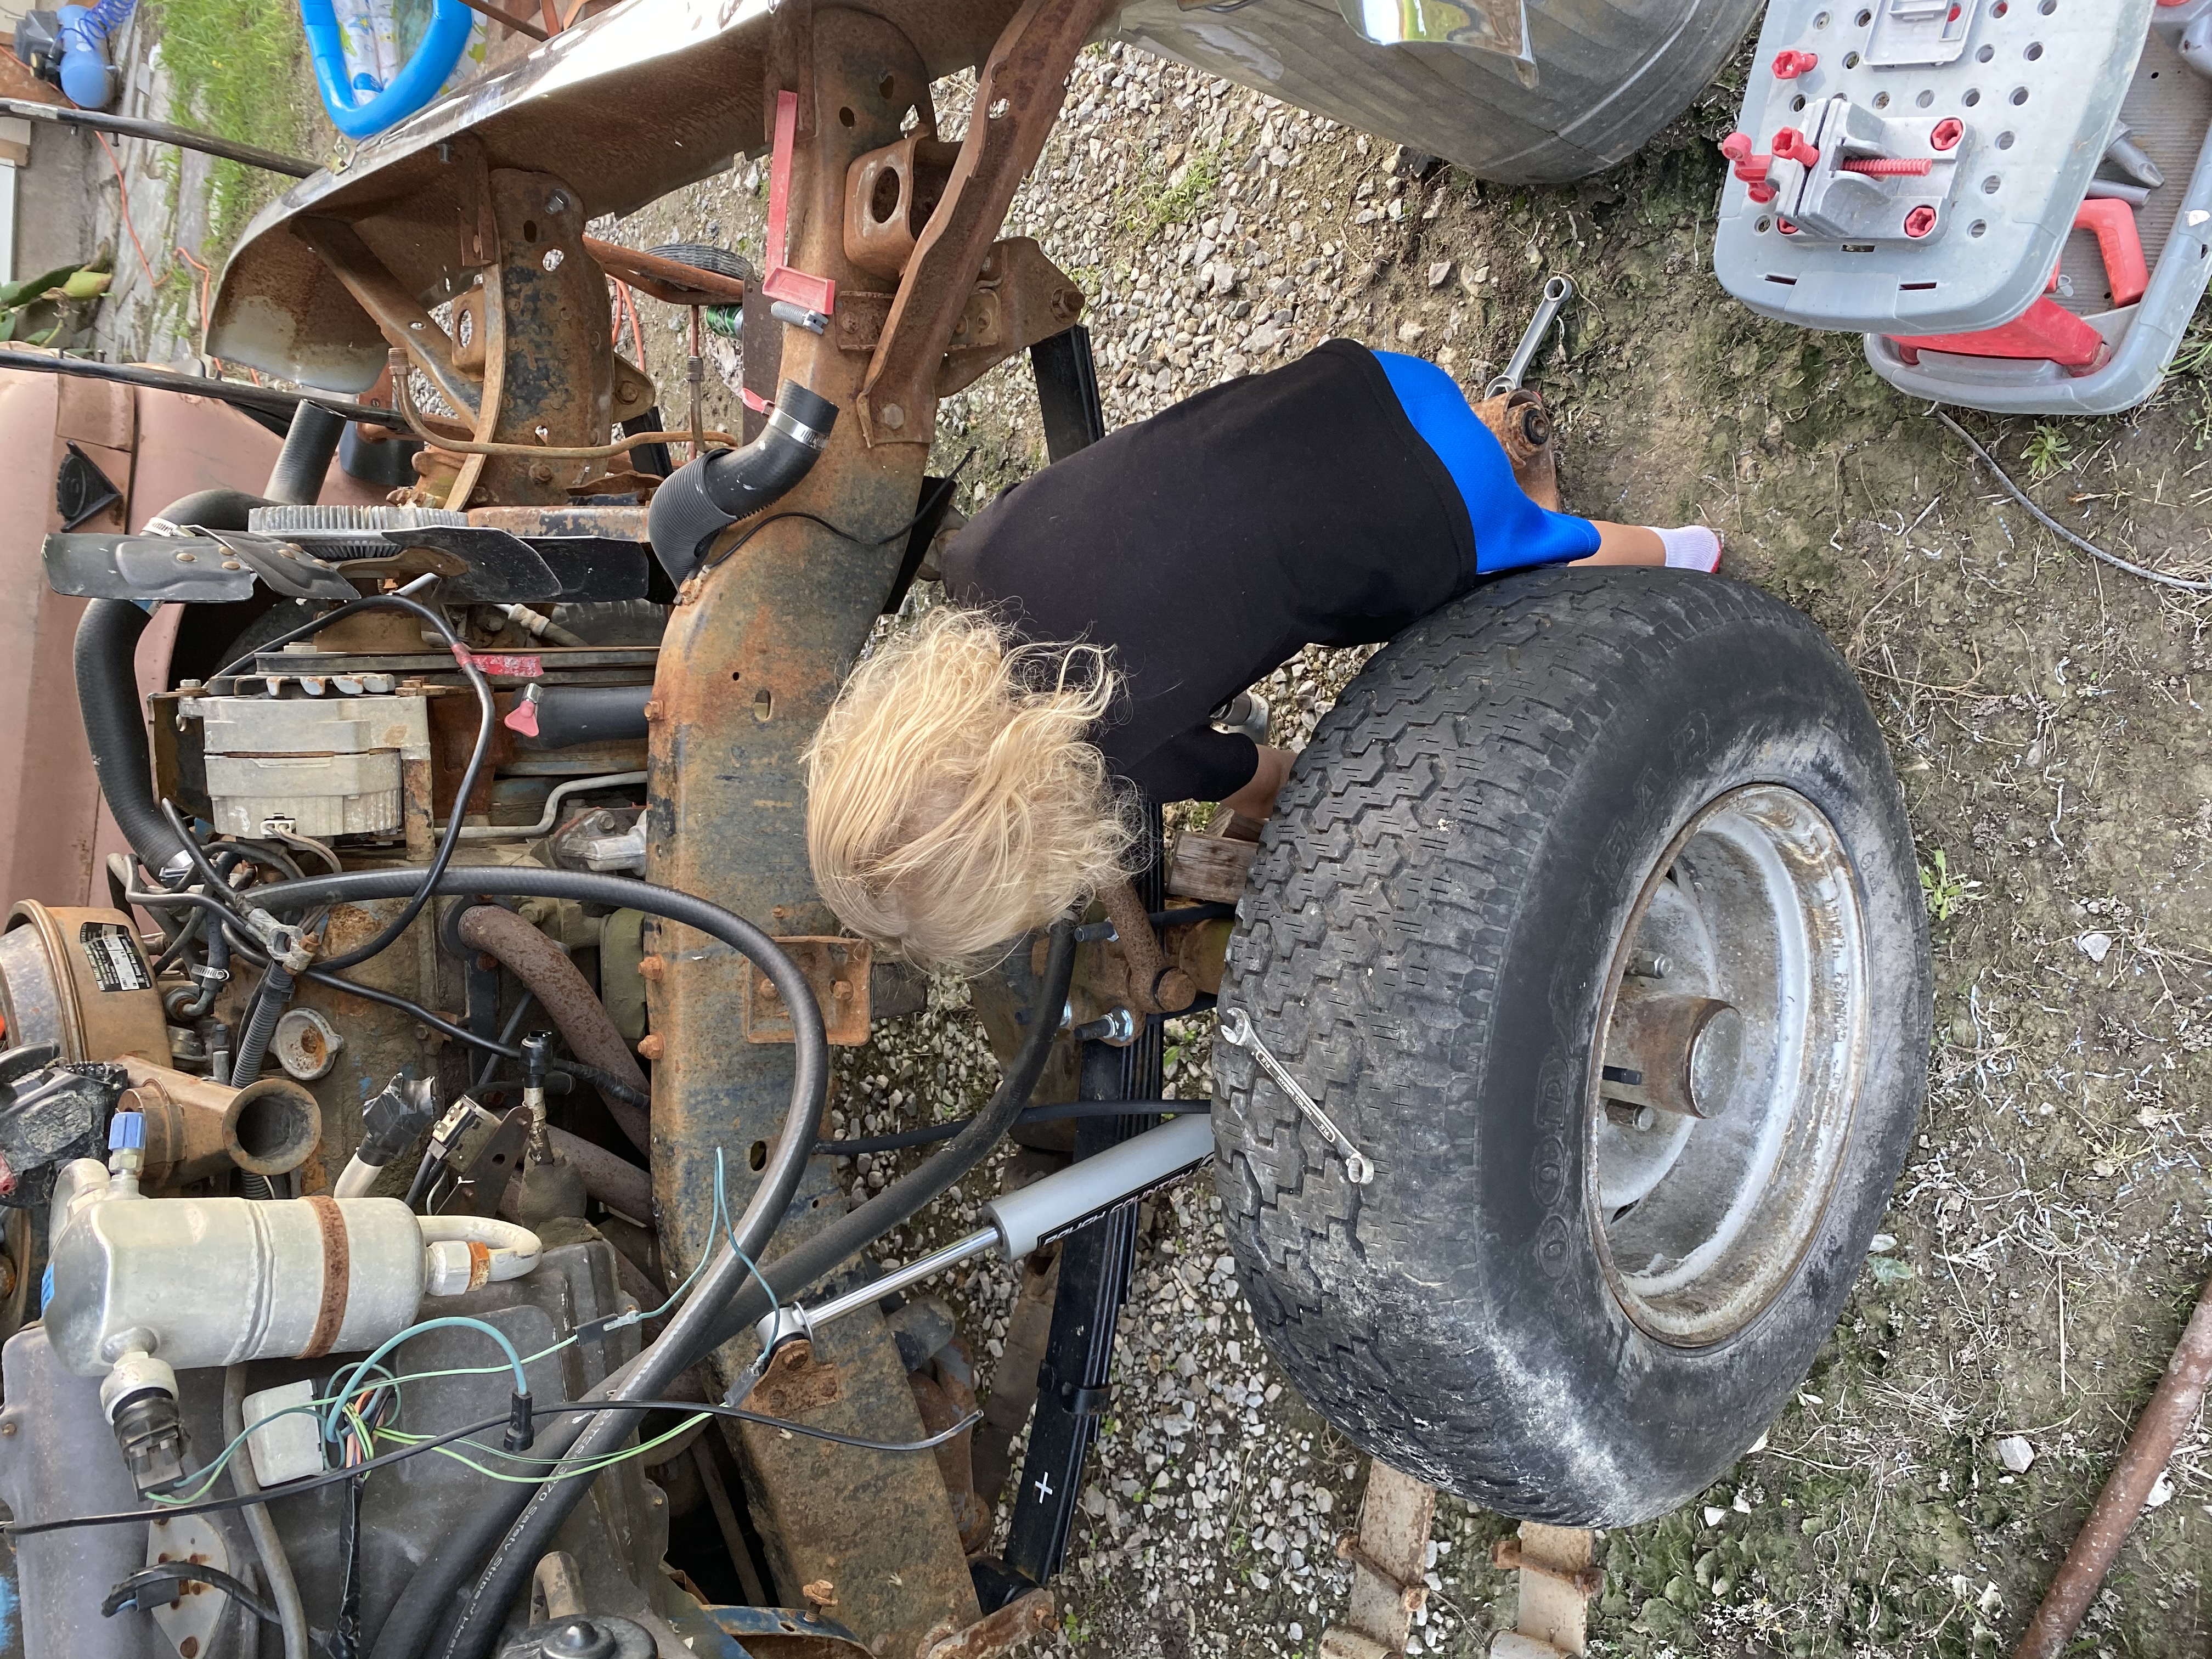 Zylen helping dad to get motor ready to pull